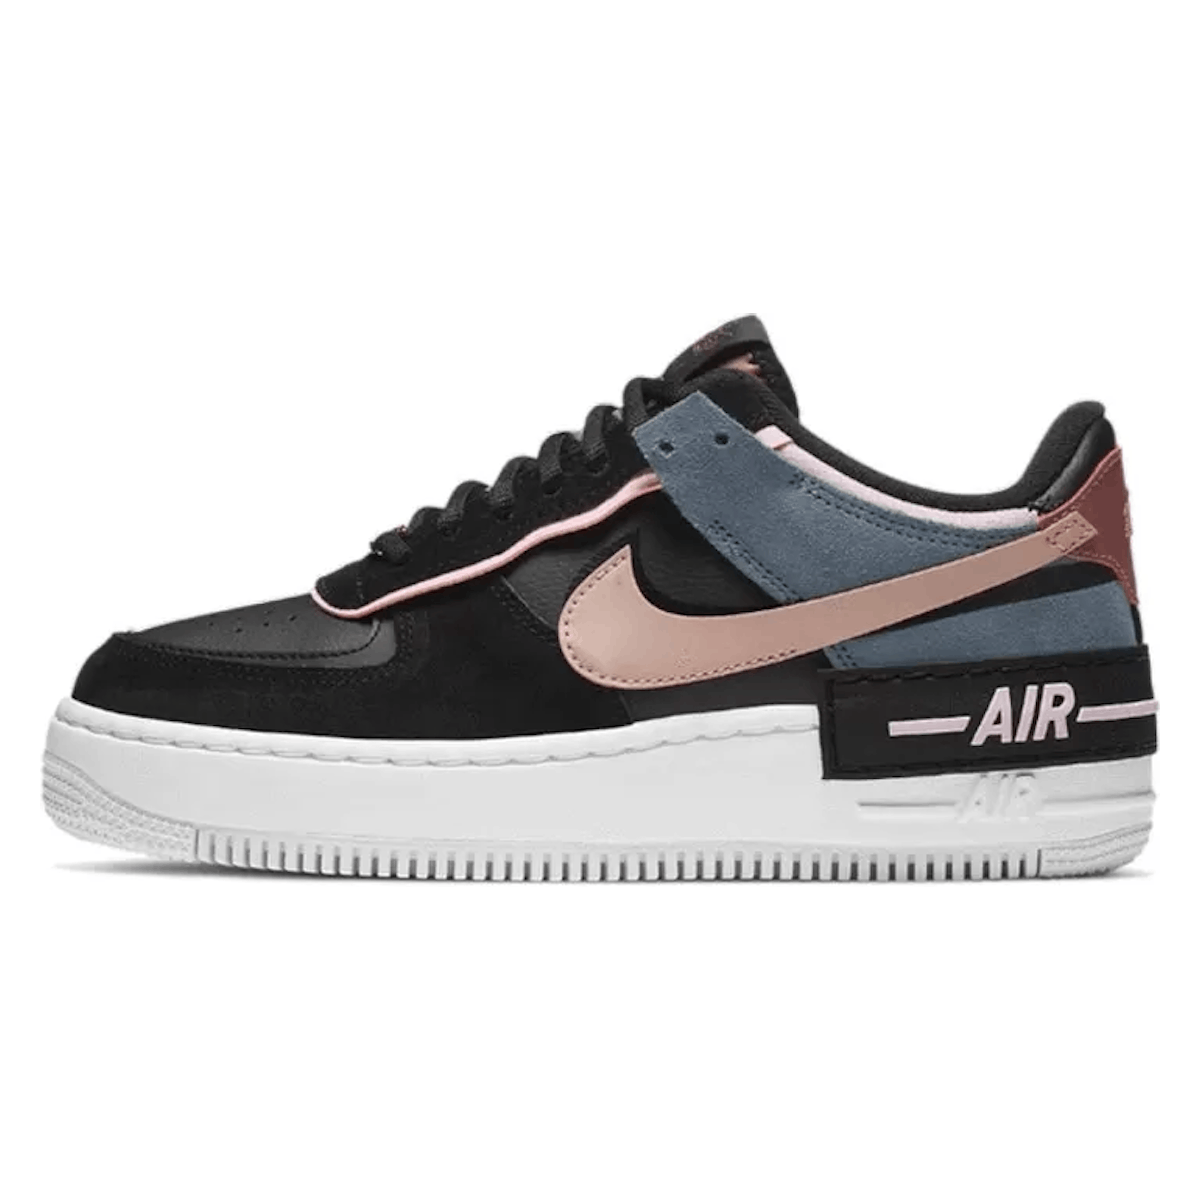 Nike WMNS Air Force 1 Shadow Black Light Arctic Pink Claystone Red